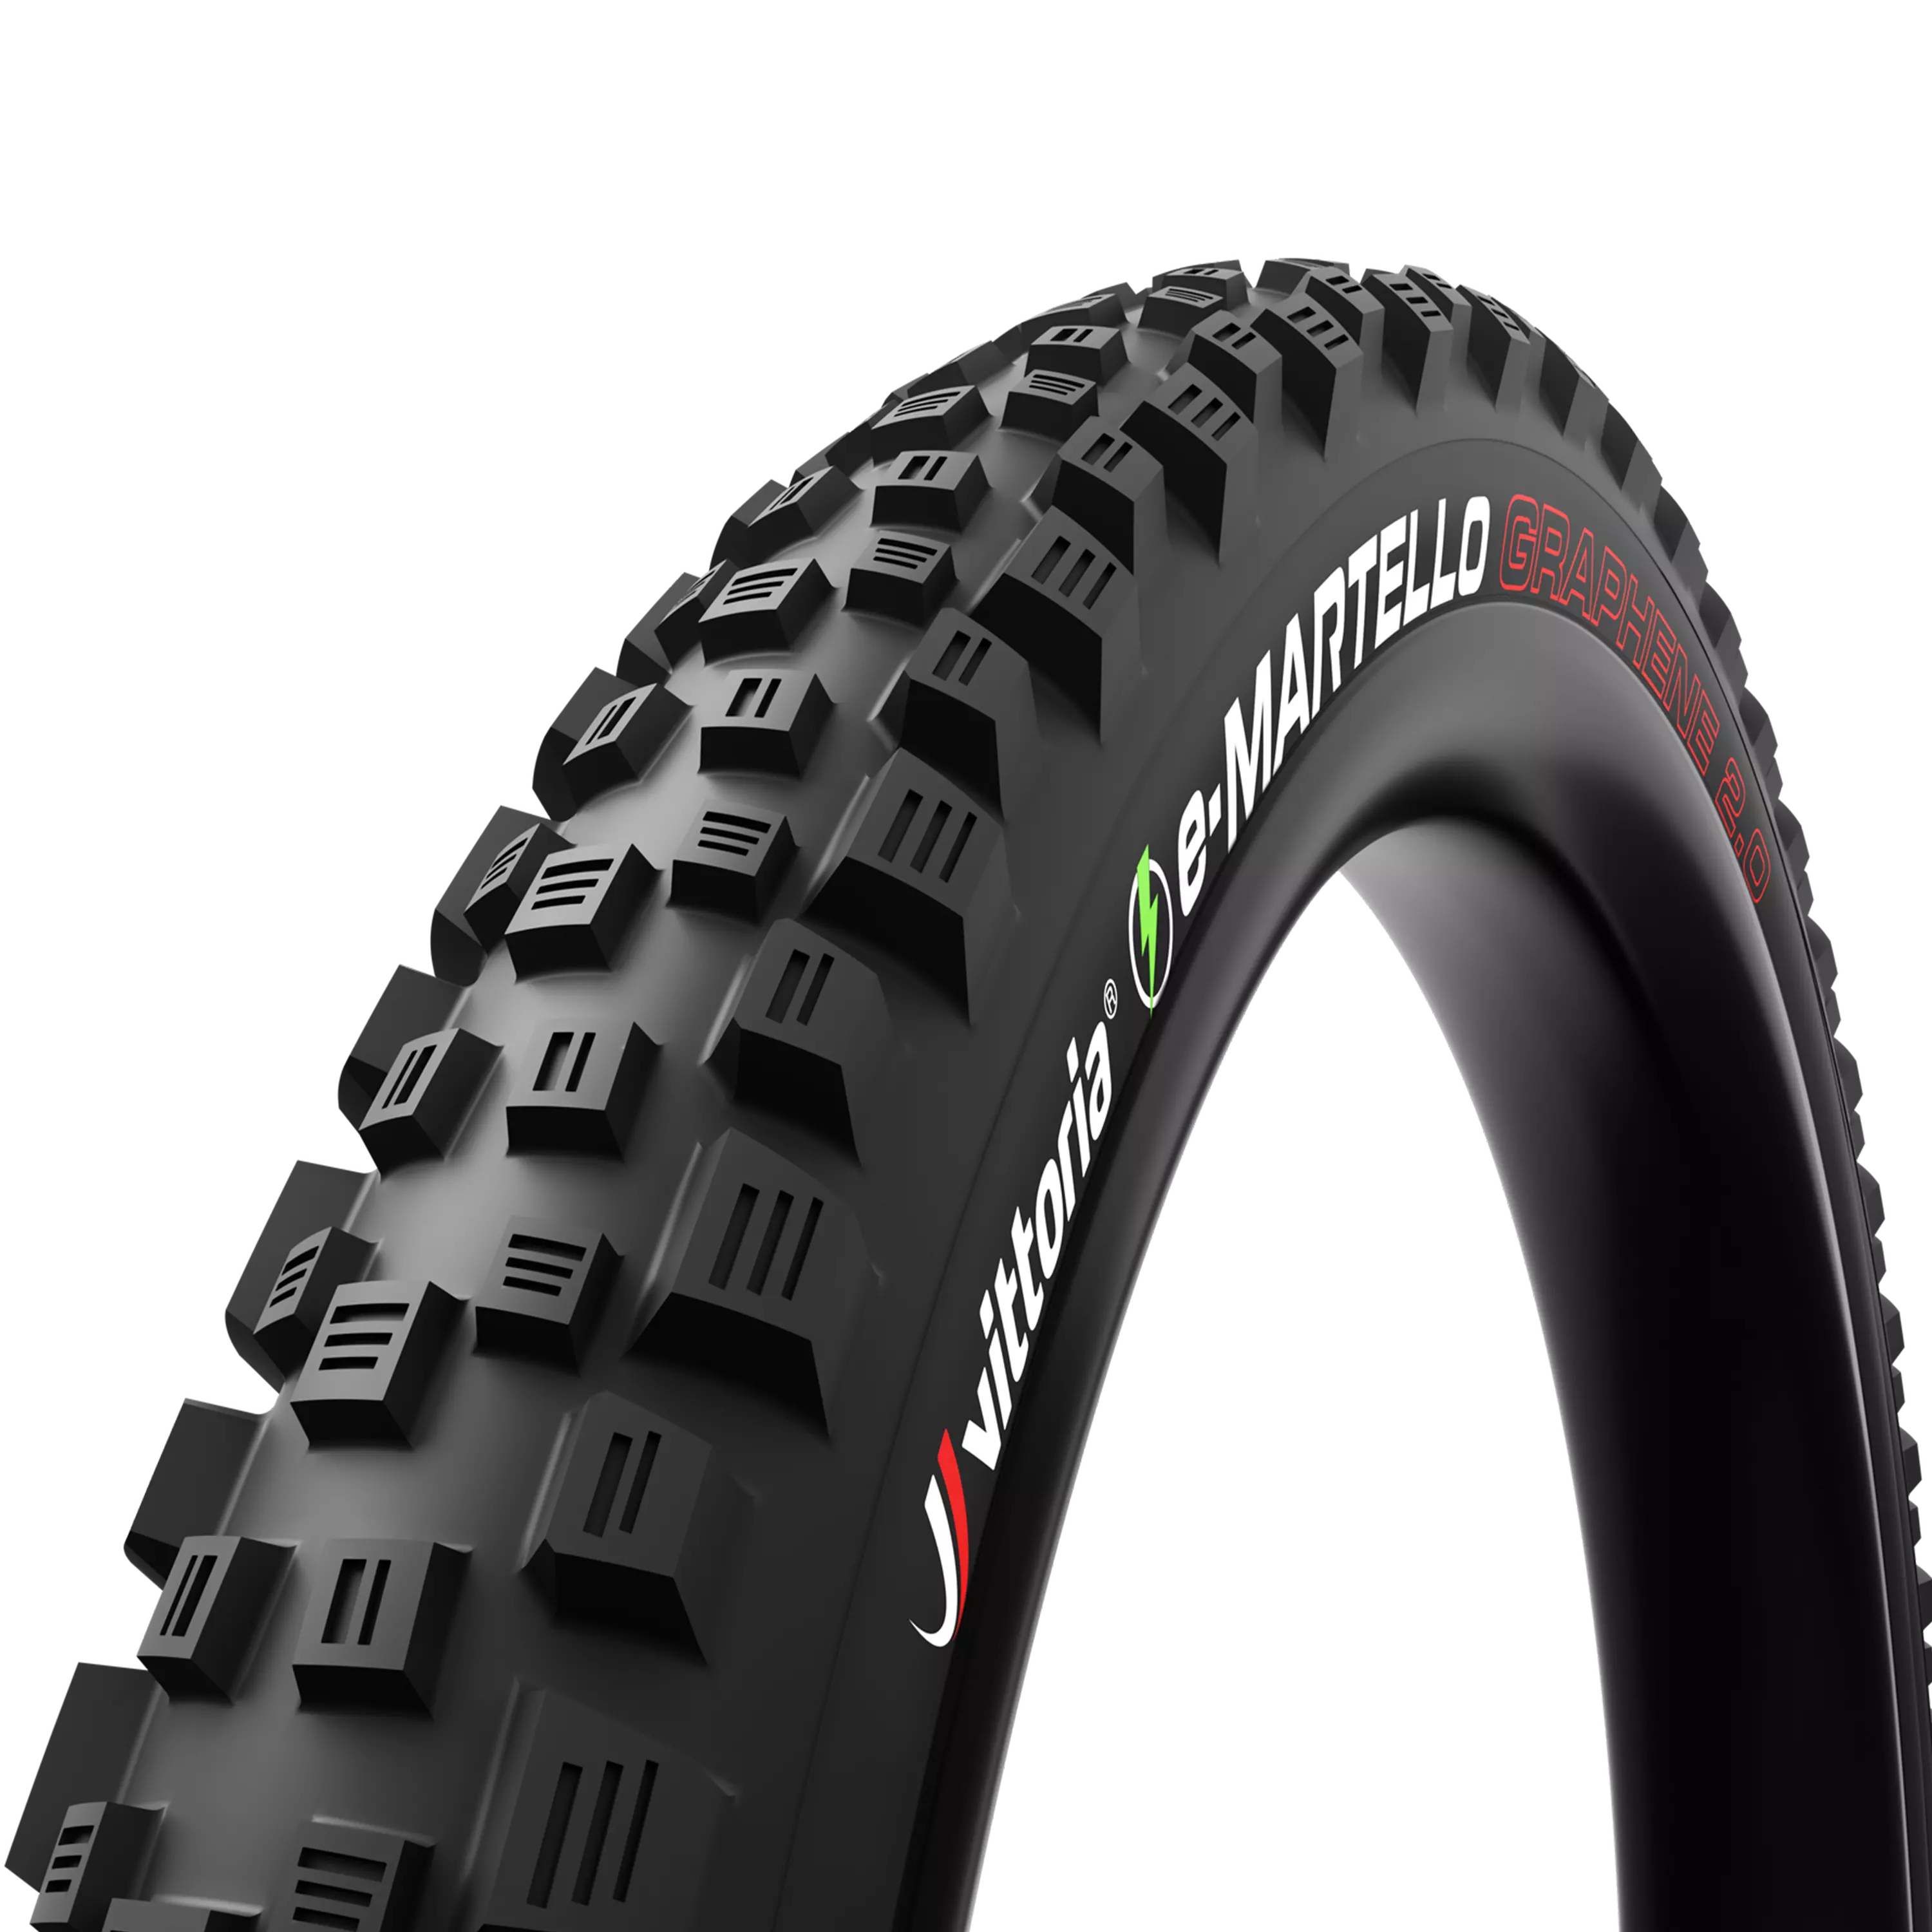 E-Bike tires: choose the best for your bike